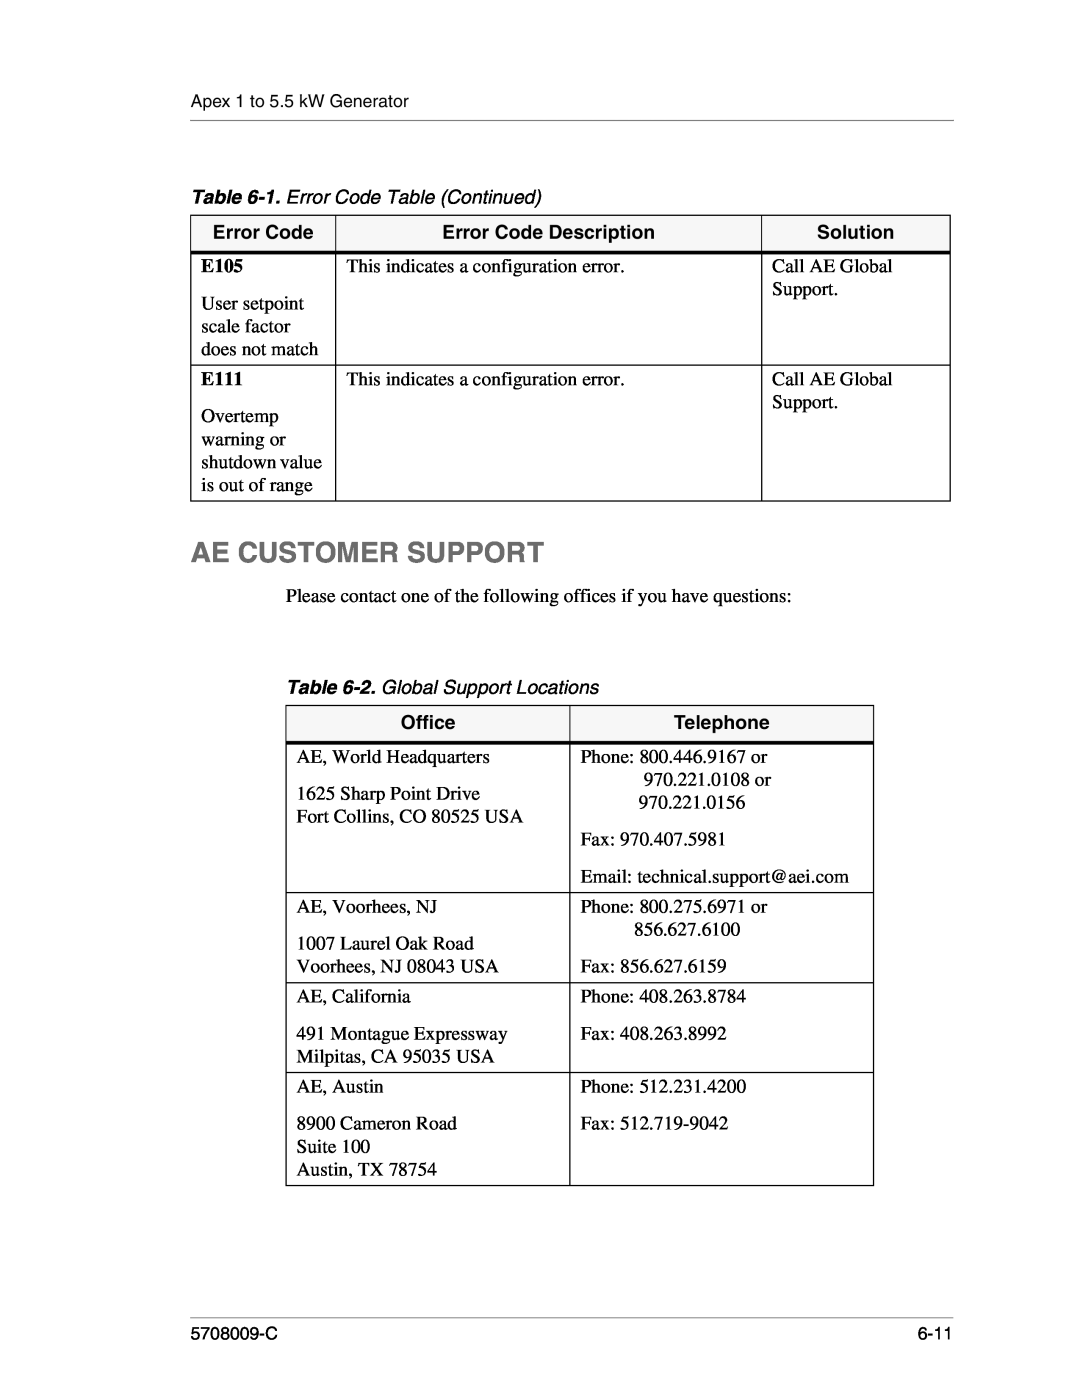 Apex Digital 5708009-C manual Ae Customer Support, 2. Global Support Locations, 1. Error Code Table Continued, E105, E111 